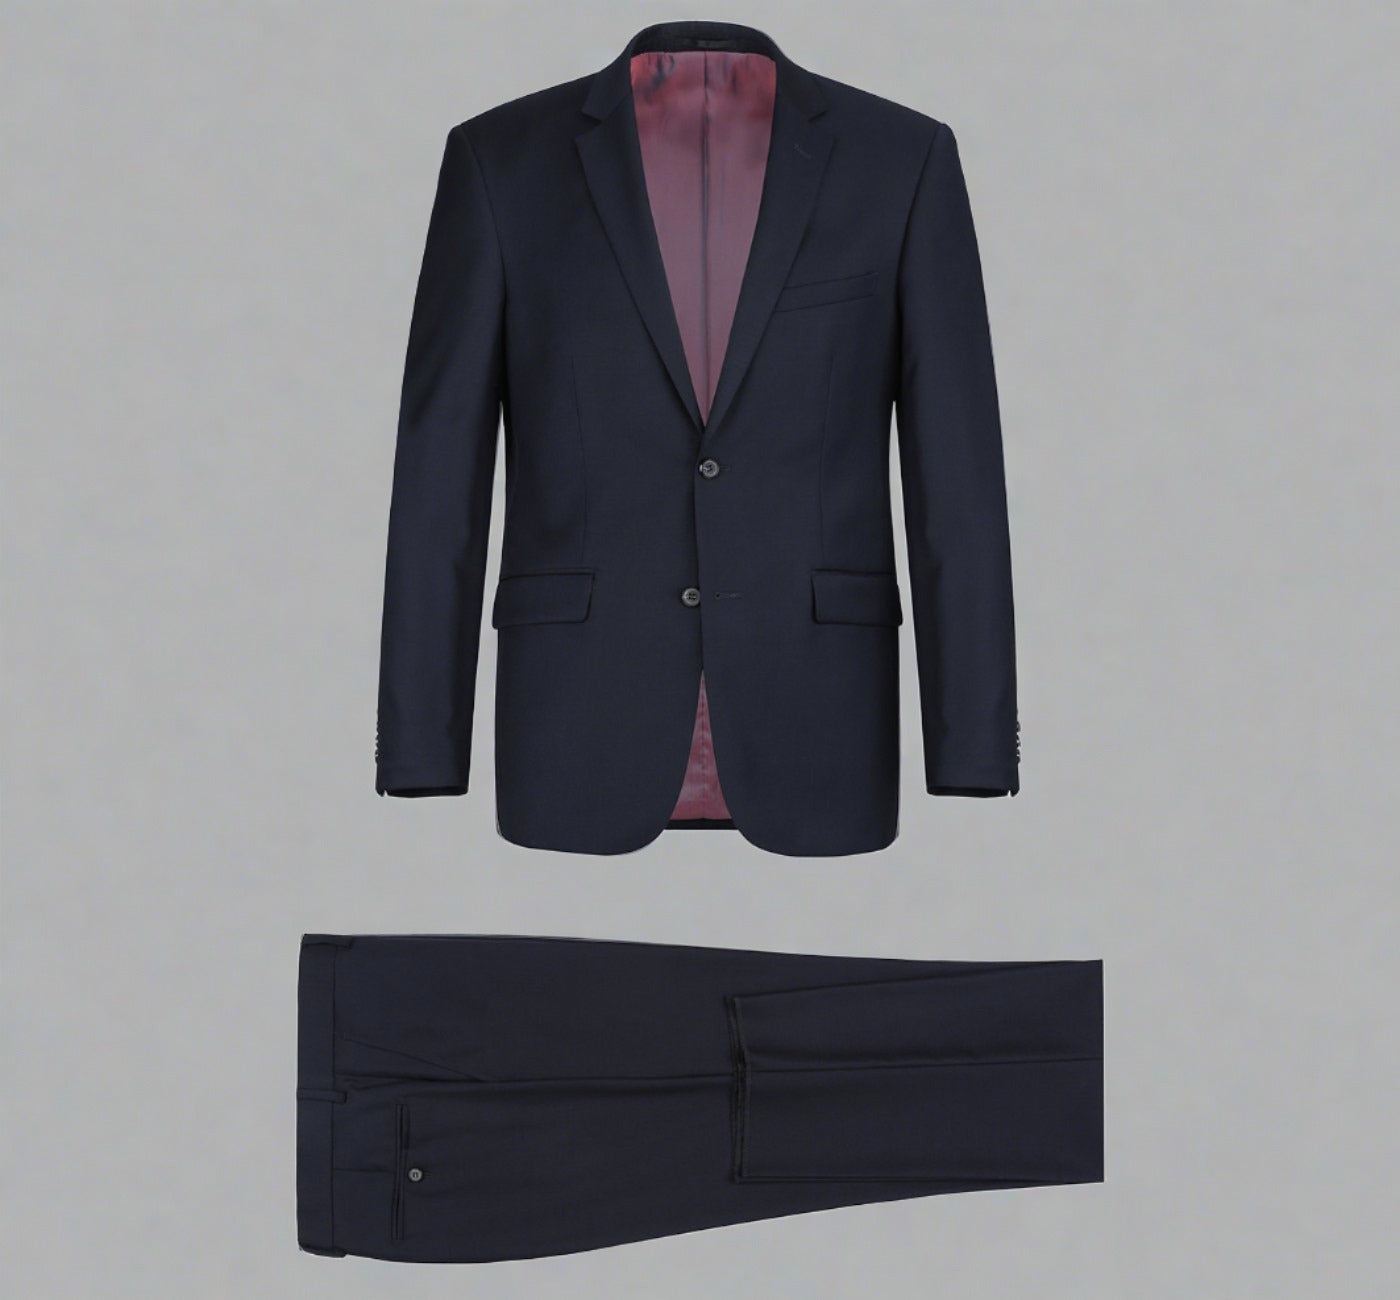 Super 140s Wool 2-Button SLIM FIT Suit in Dark Navy (Short, Regular, and Long Available) by Renoir